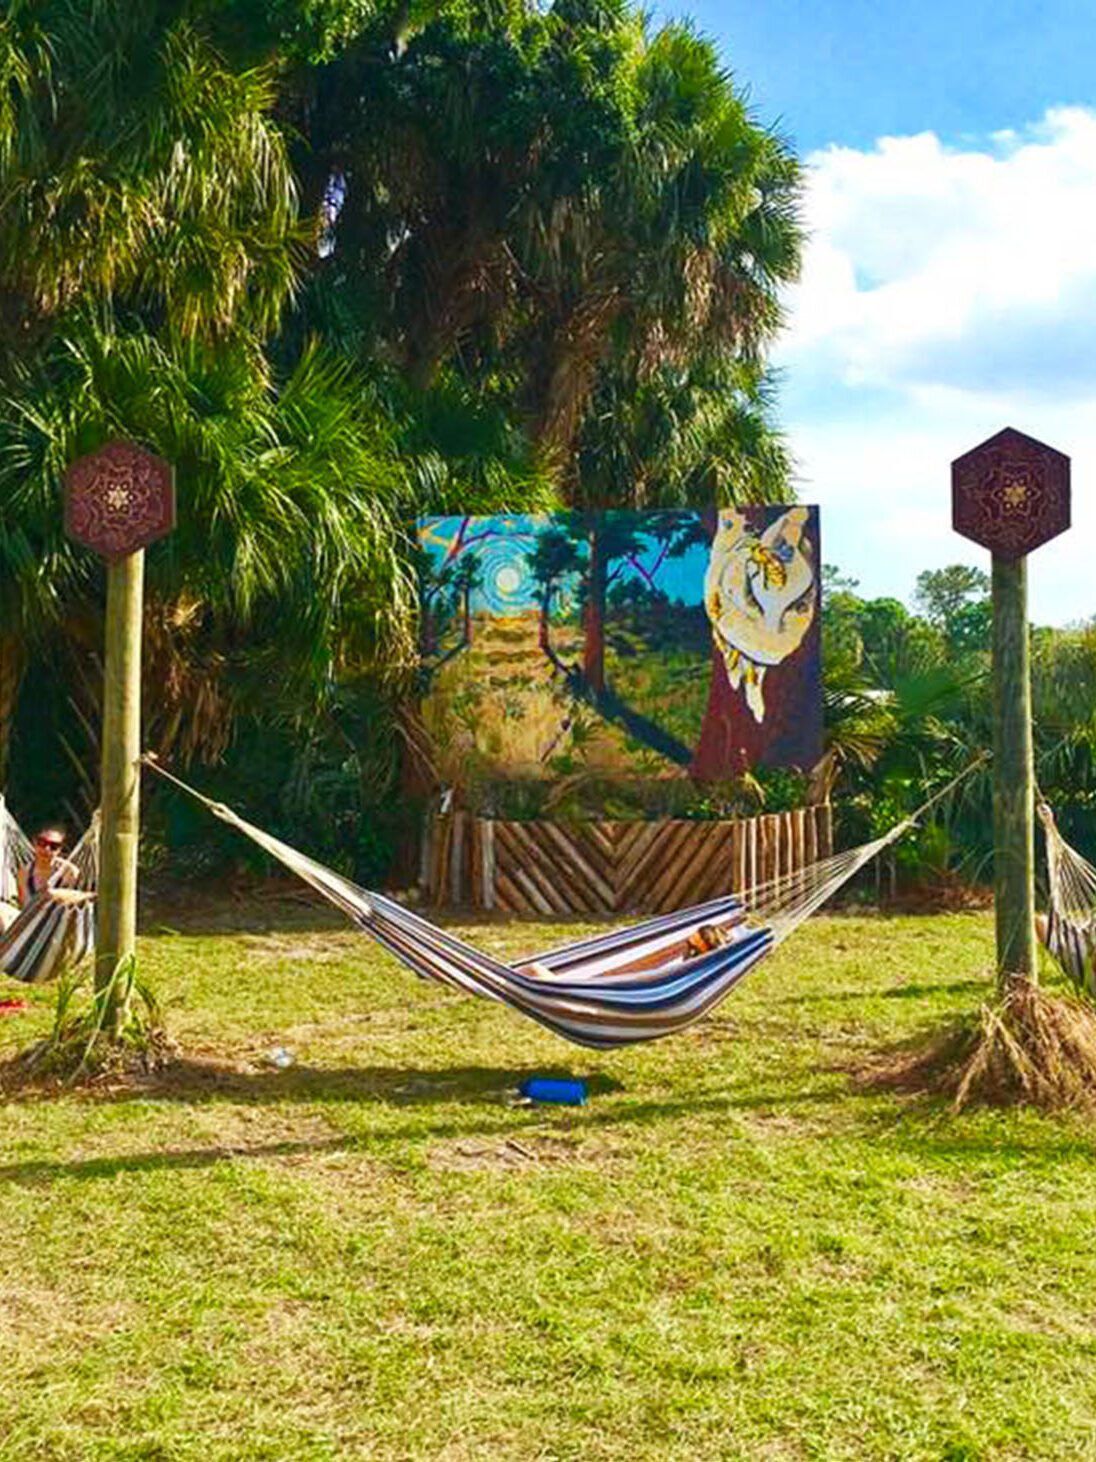 Bee Aware mural at the Okeechobee Music Festival. Created by heartspace art, this mural has a message about the importance of bees in our ecosystem. This photo shows the entire installation including the hammock hang out.